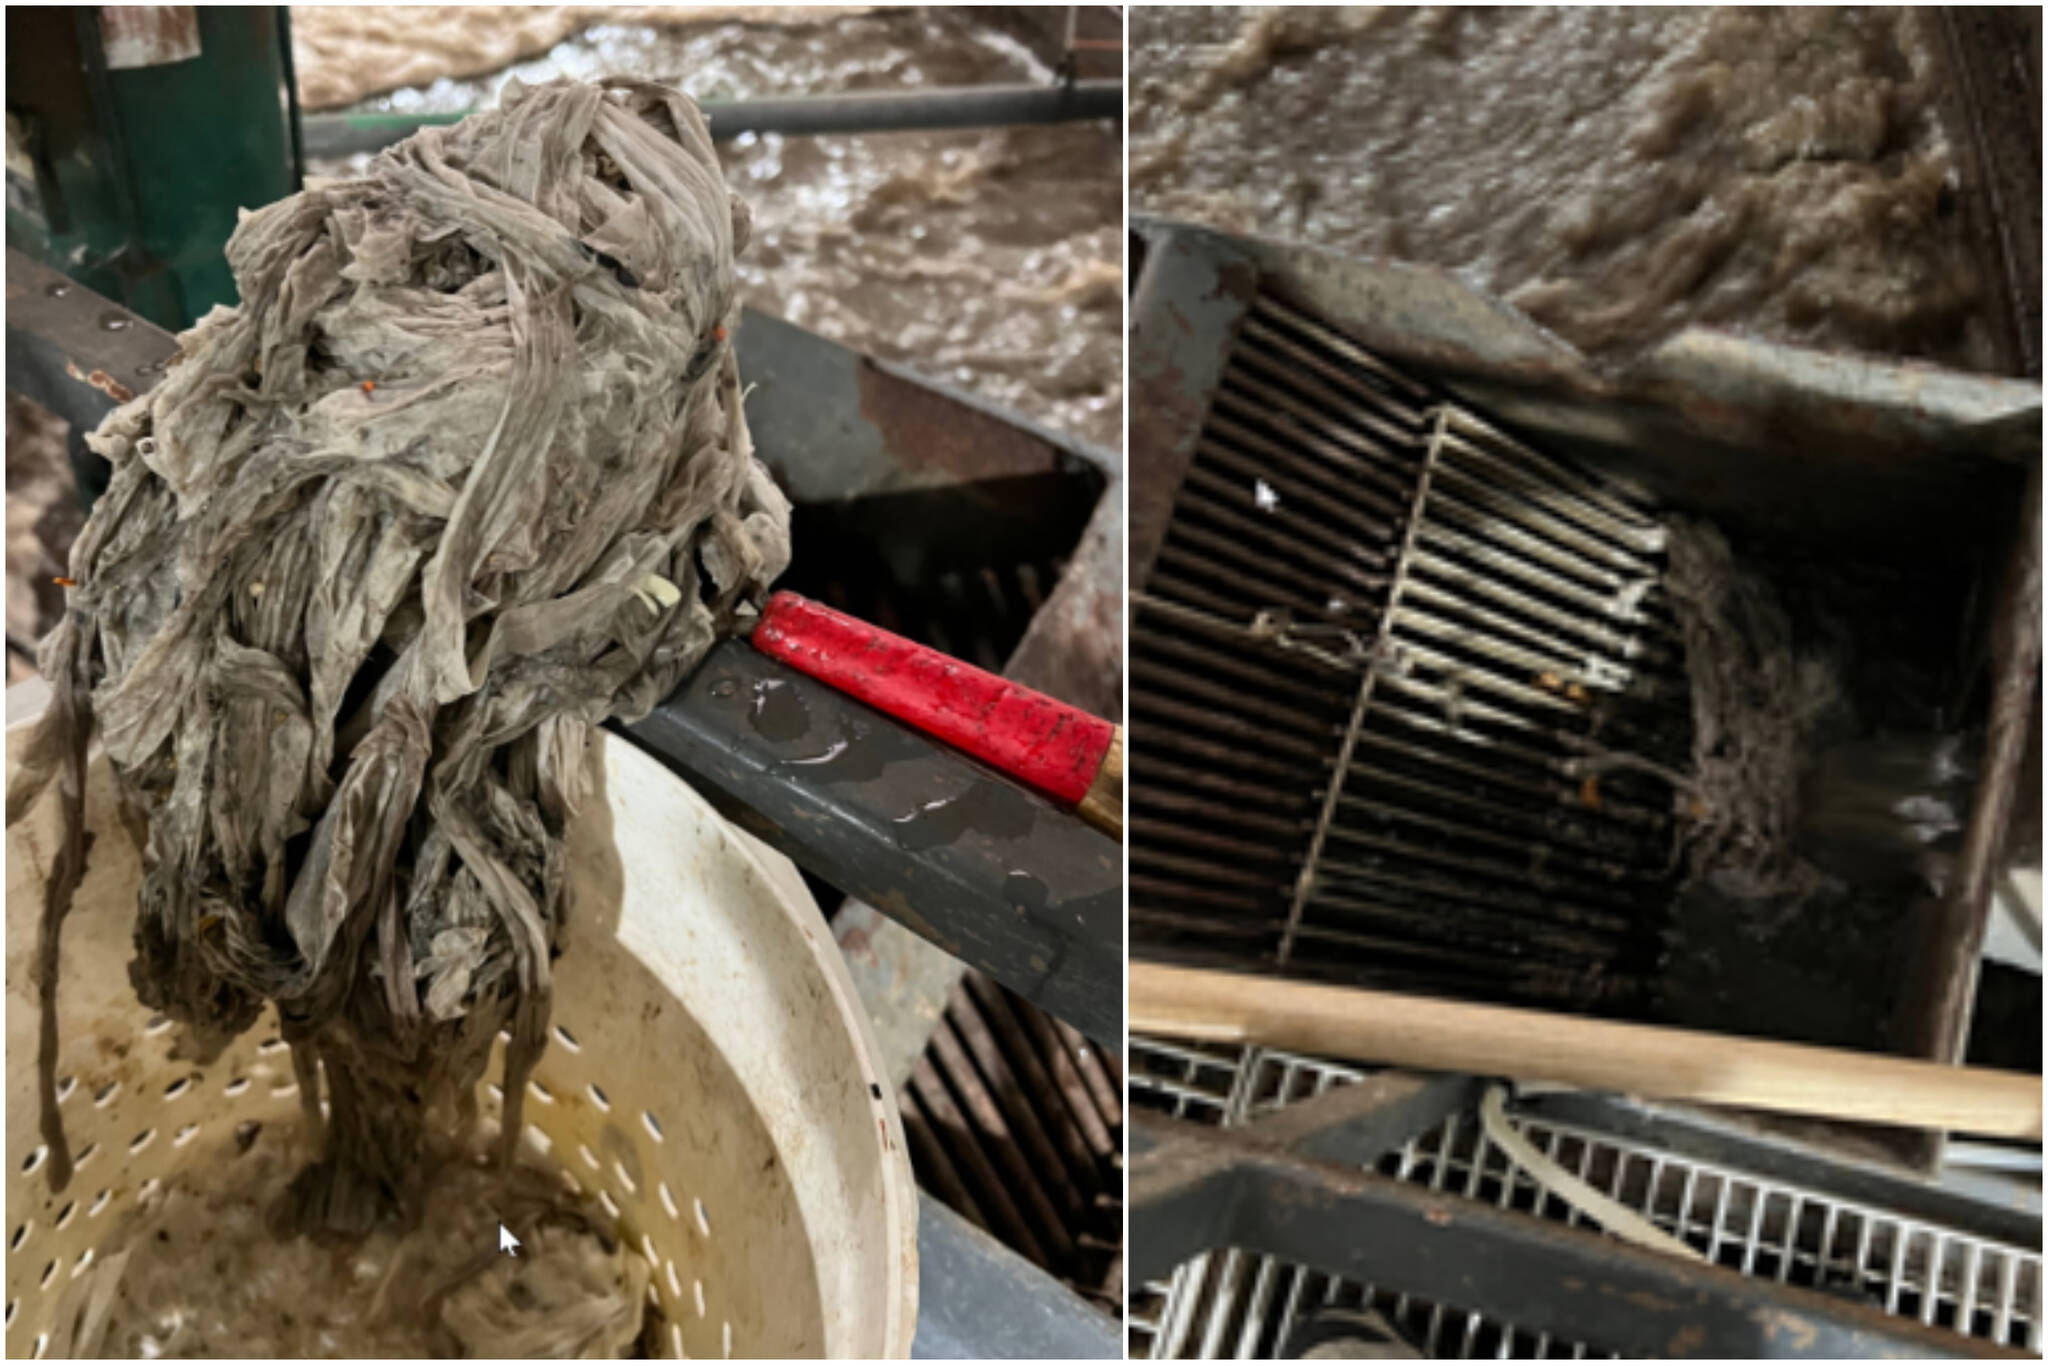 Courtesy Photos / City and Borough of Juneau
This composite image shows mopheads recently flushed down toilets in Juneau that are creating problems at the Auke Bay wastewater treatment facility.